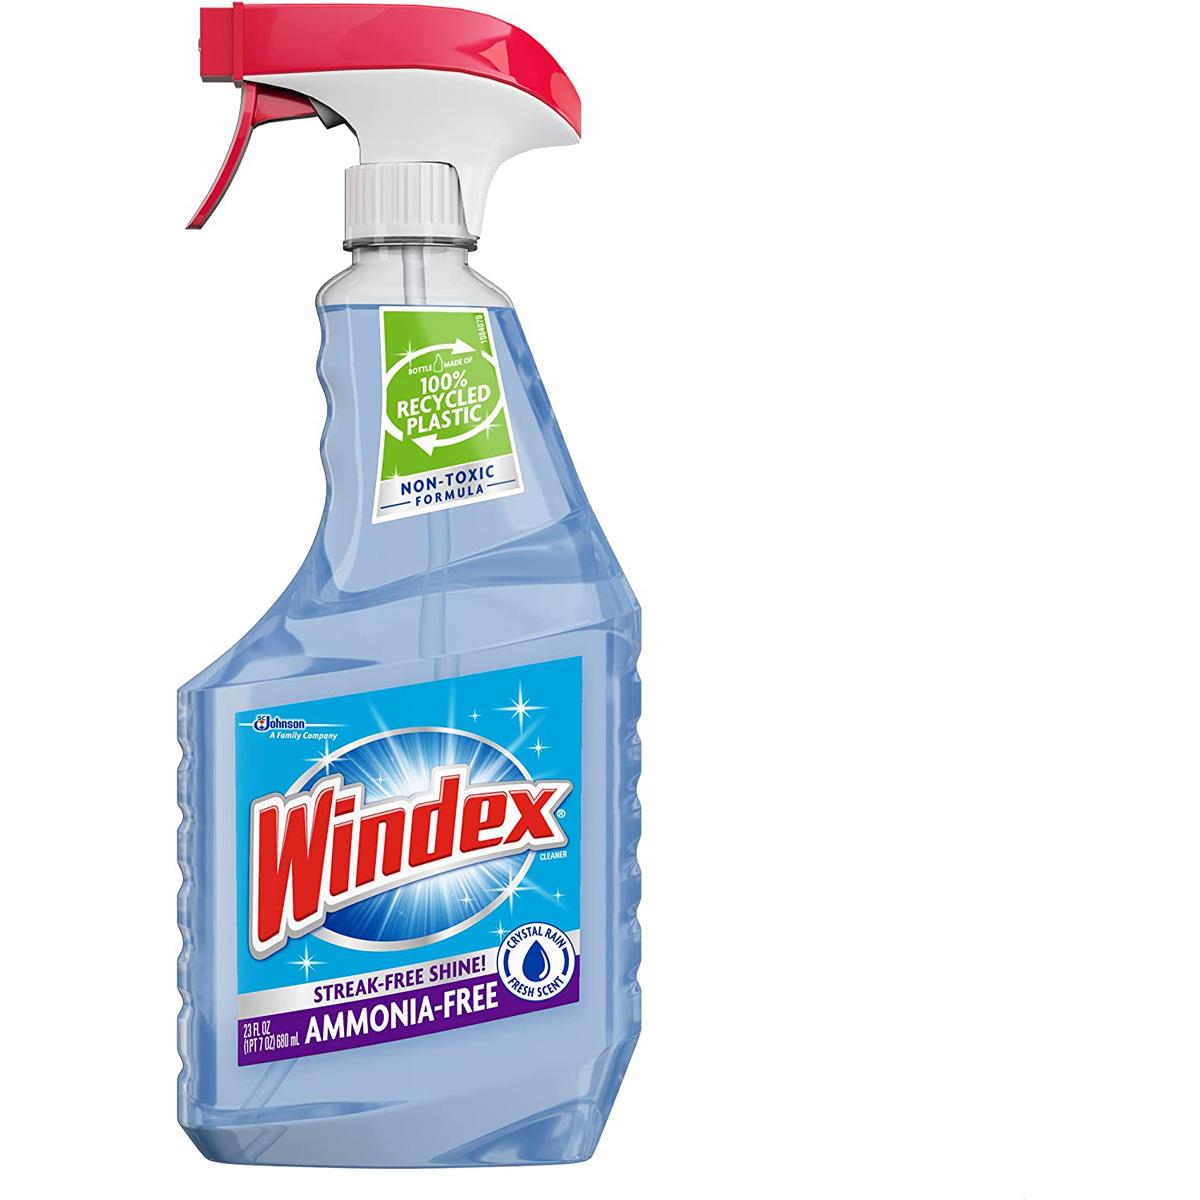 Windex Glass and Window Cleaner Spray Bottle for $2.47